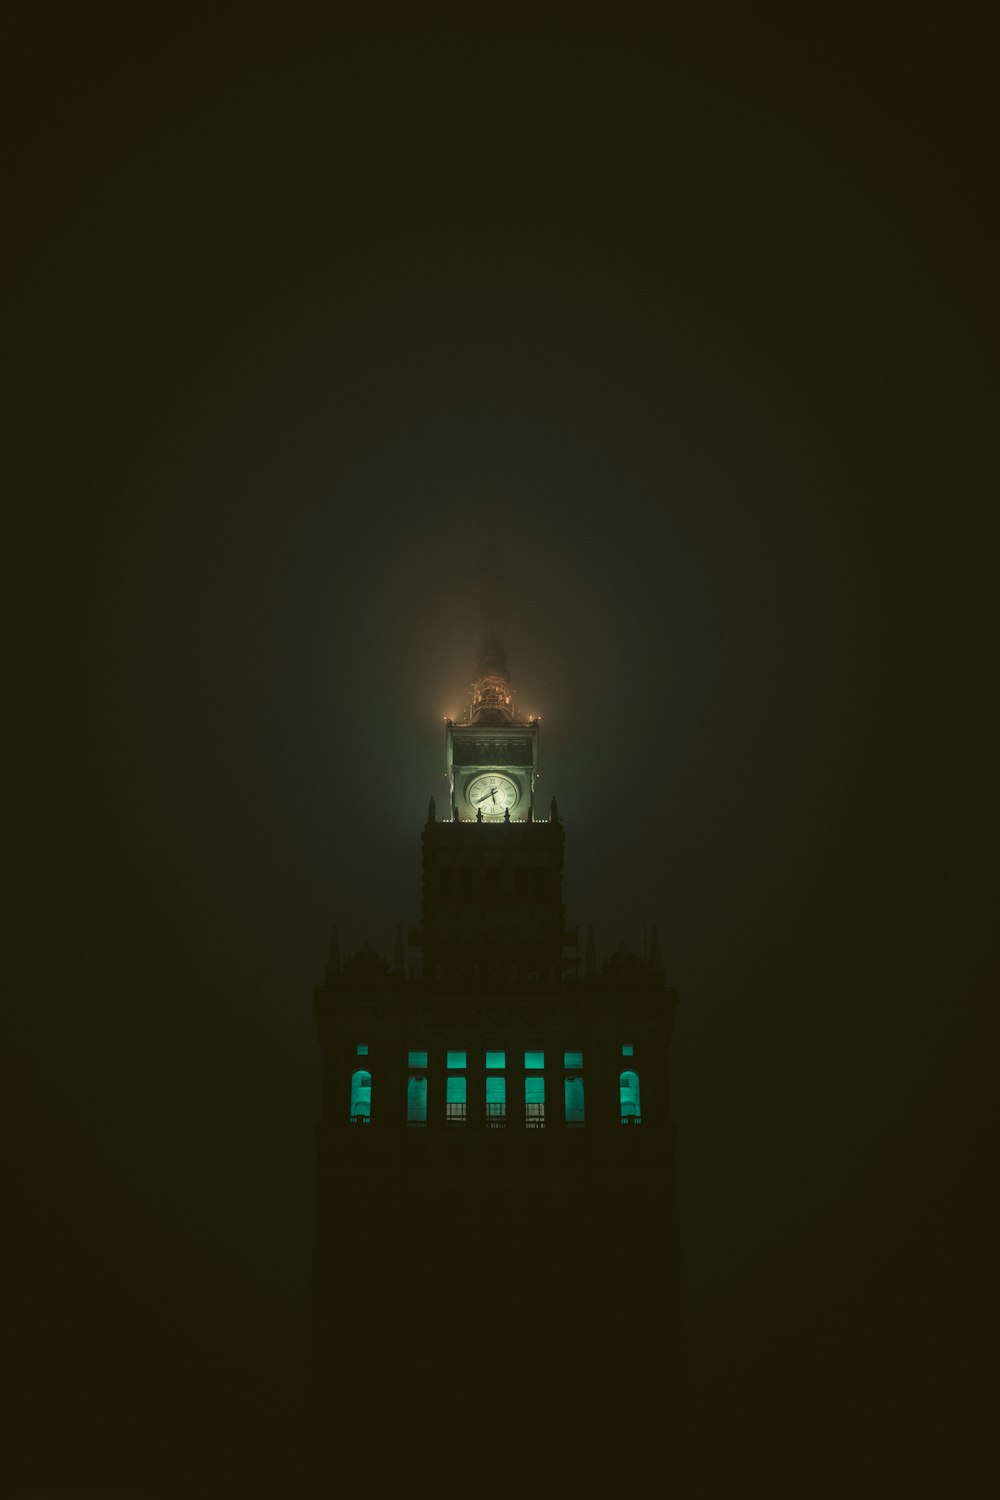 a clock tower lit up in the dark